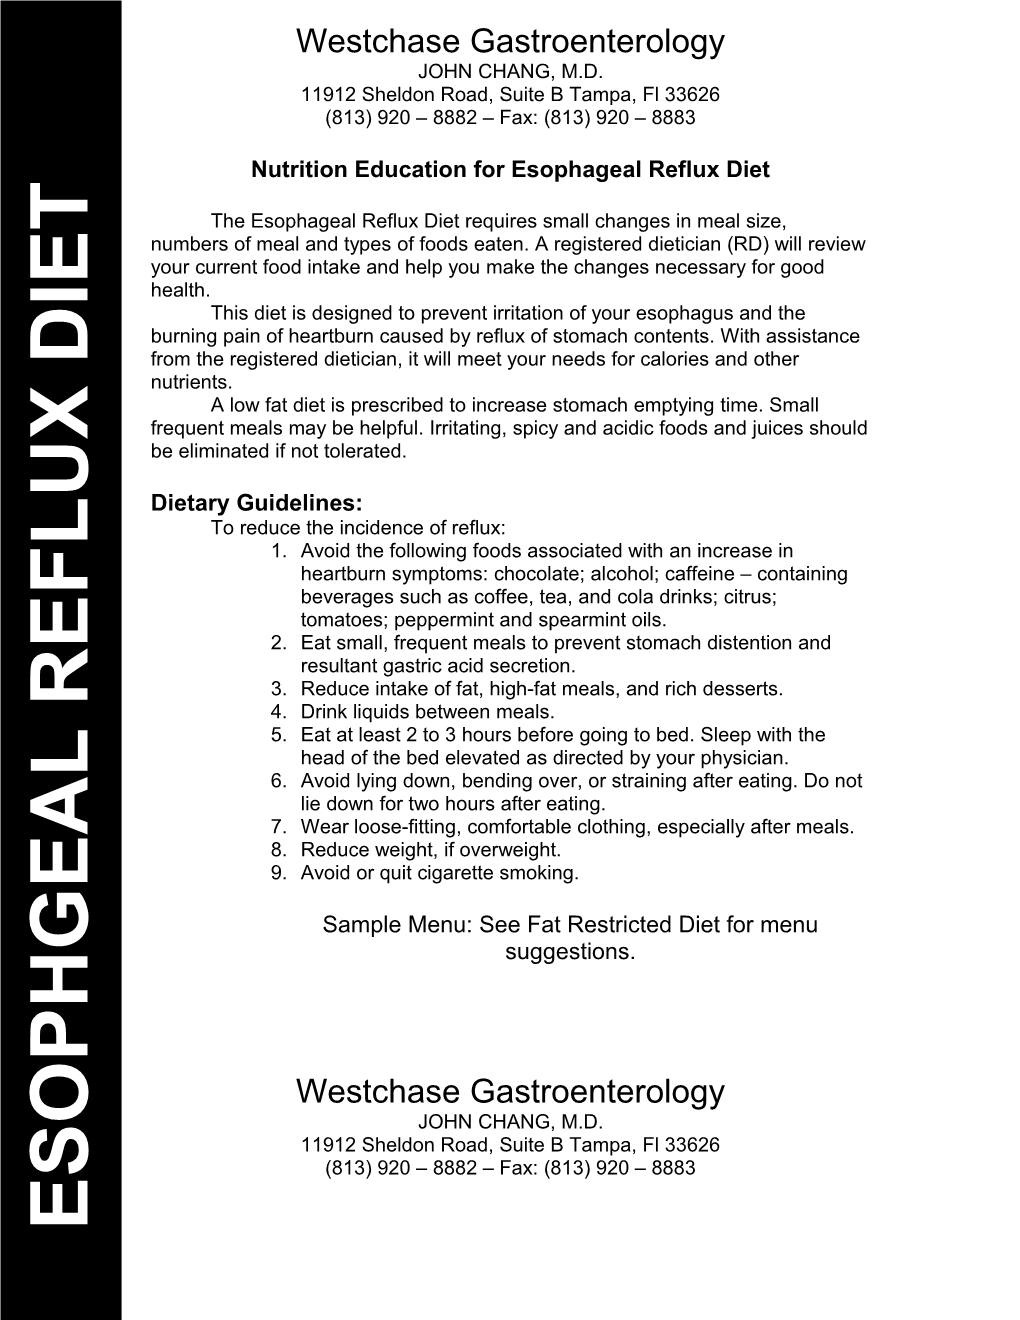 Nutrition Education for Esophageal Reflux Diet